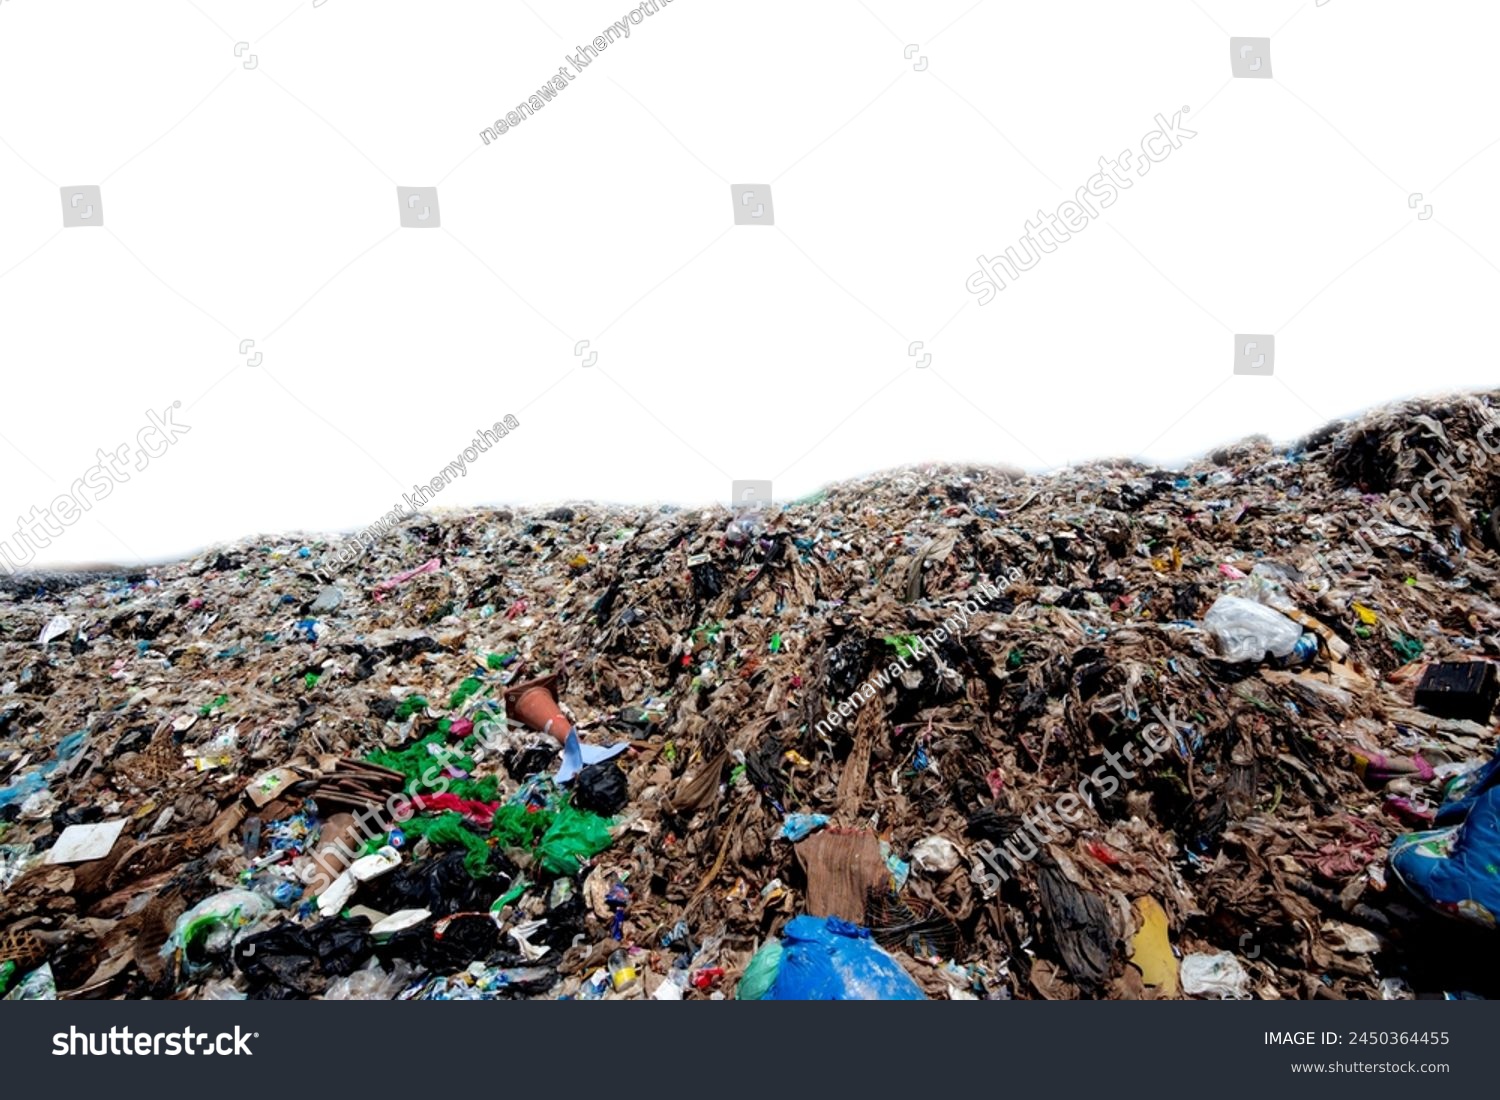 Big pile of trash on a white background Mountains of plastic waste, old rags, and scraps are thrown away on roadsides and public places. Household waste that is difficult to decompose causes pollution #2450364455